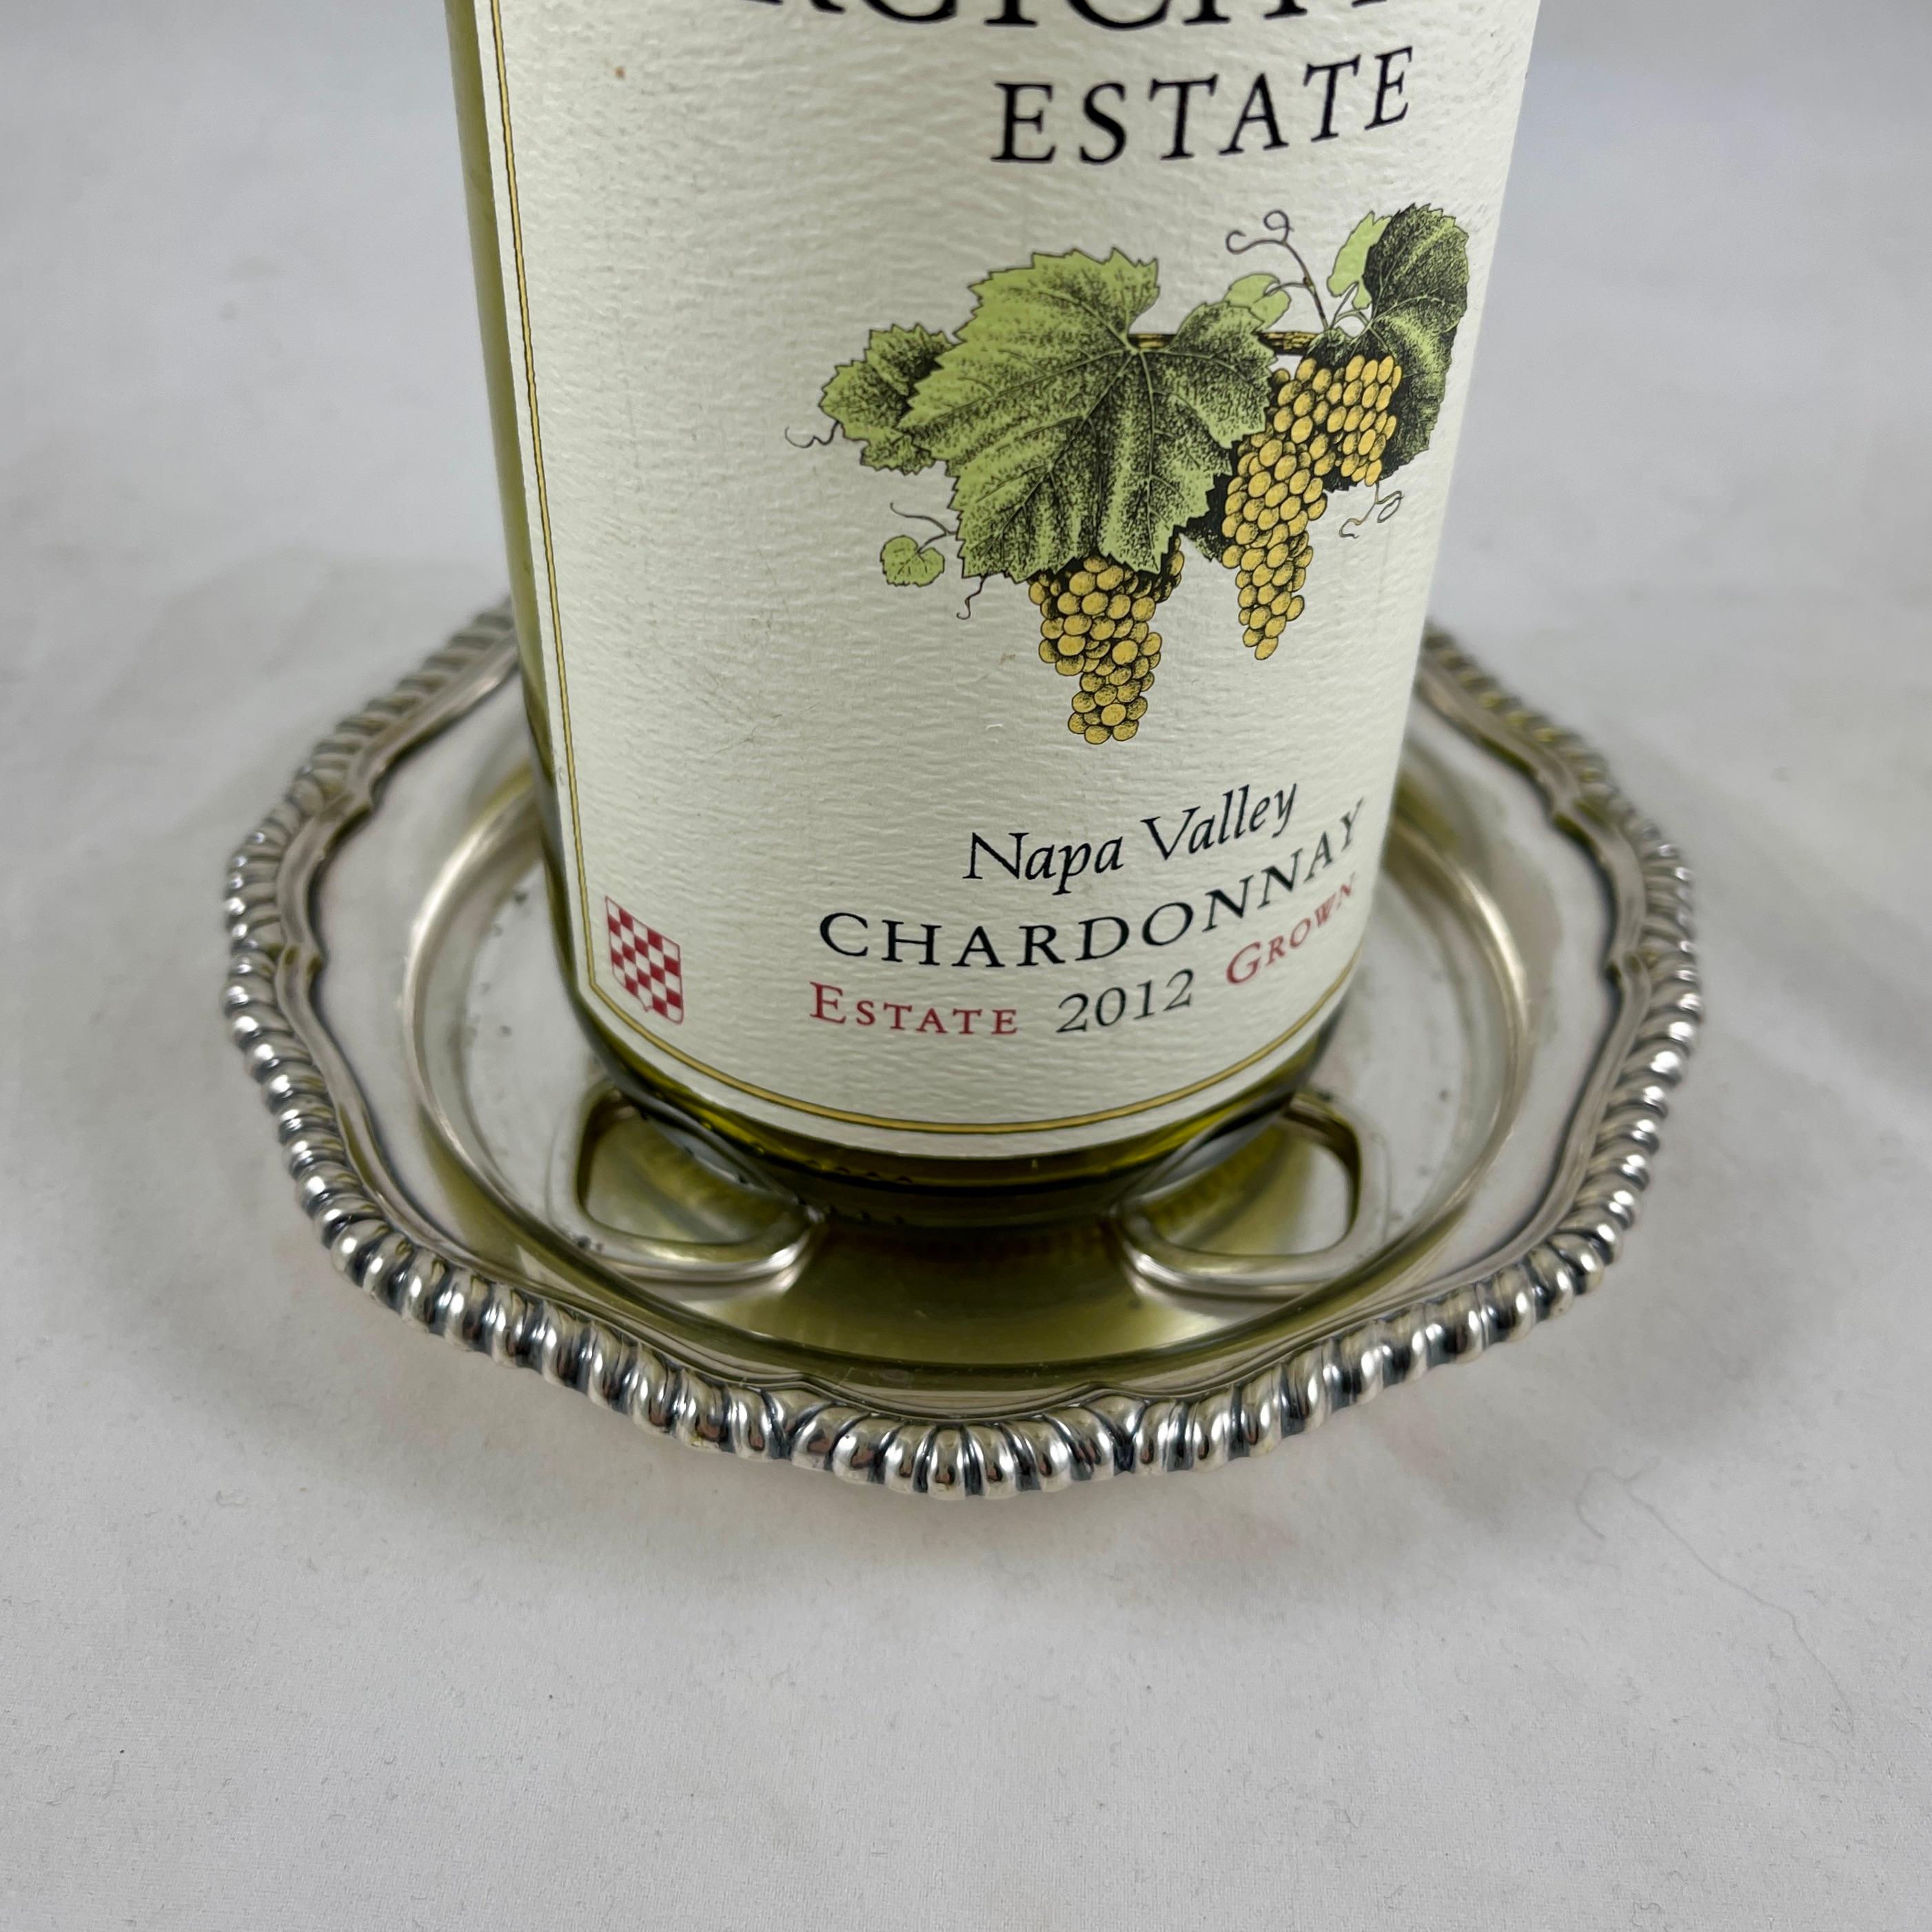 Tiffany & Co. New York Silver Plate Wine Bottle Coaster with Liner Insert In Good Condition For Sale In Philadelphia, PA